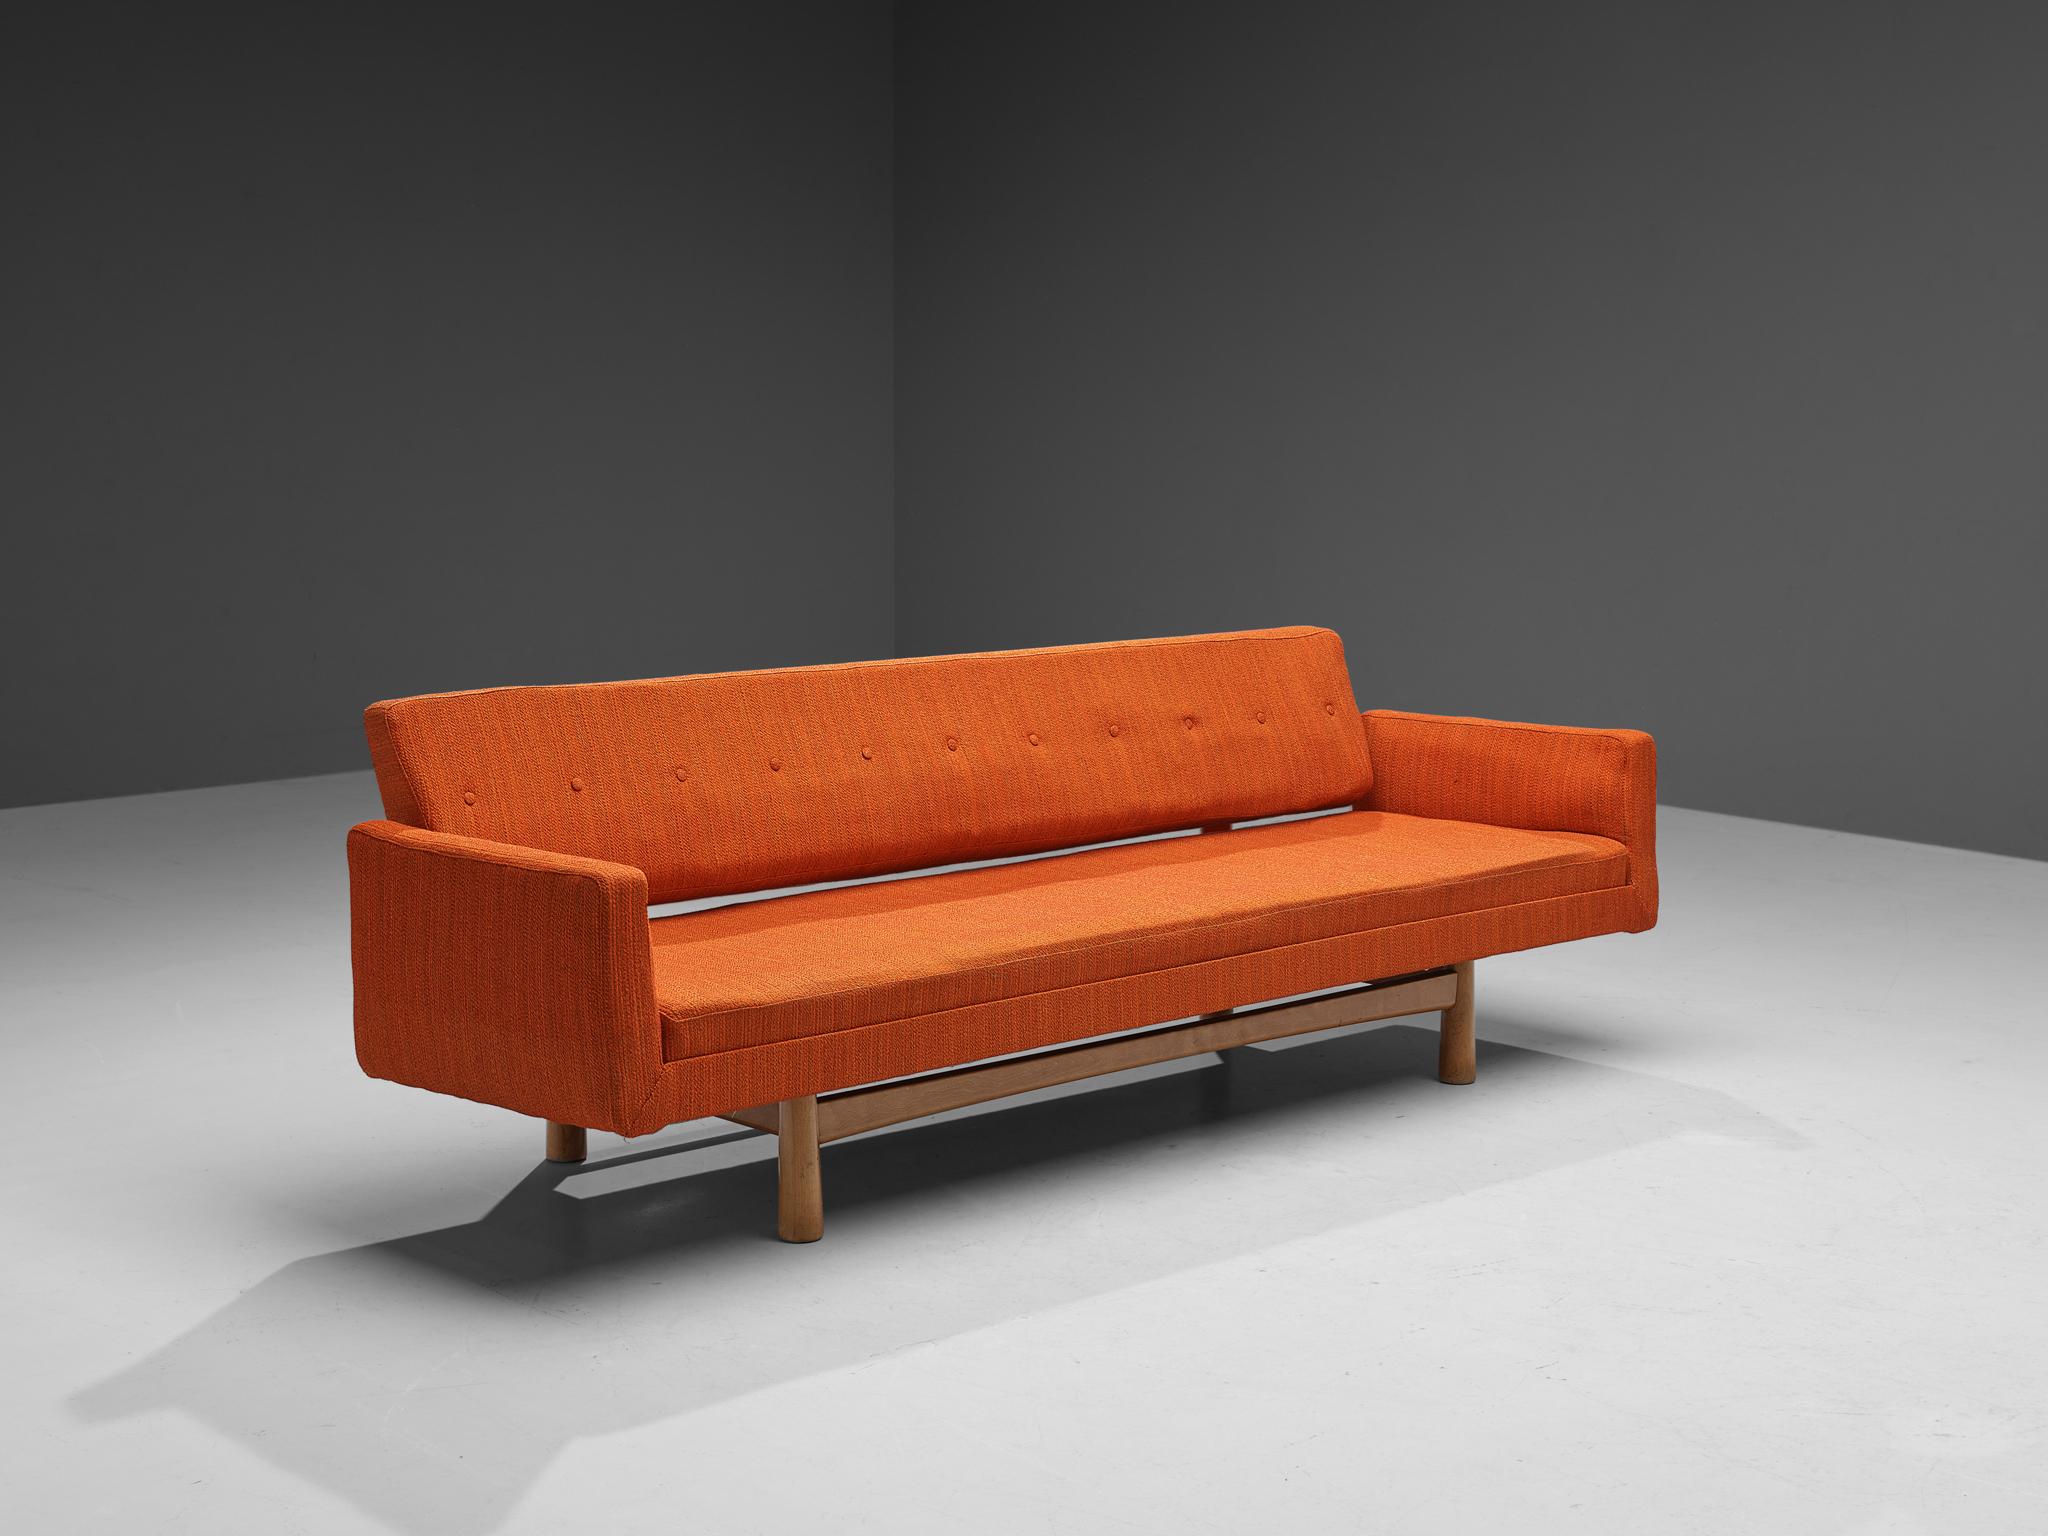 Edward Wormley for Dunbar Furniture / DUX of Sweden, sofa model 5316, fabric, beech, metal, United States, design 1952

This three-seat sofa was designed by Edward Wormley for Dunbar in 1952. The eye-catching orange fabric turns this elegant sofa